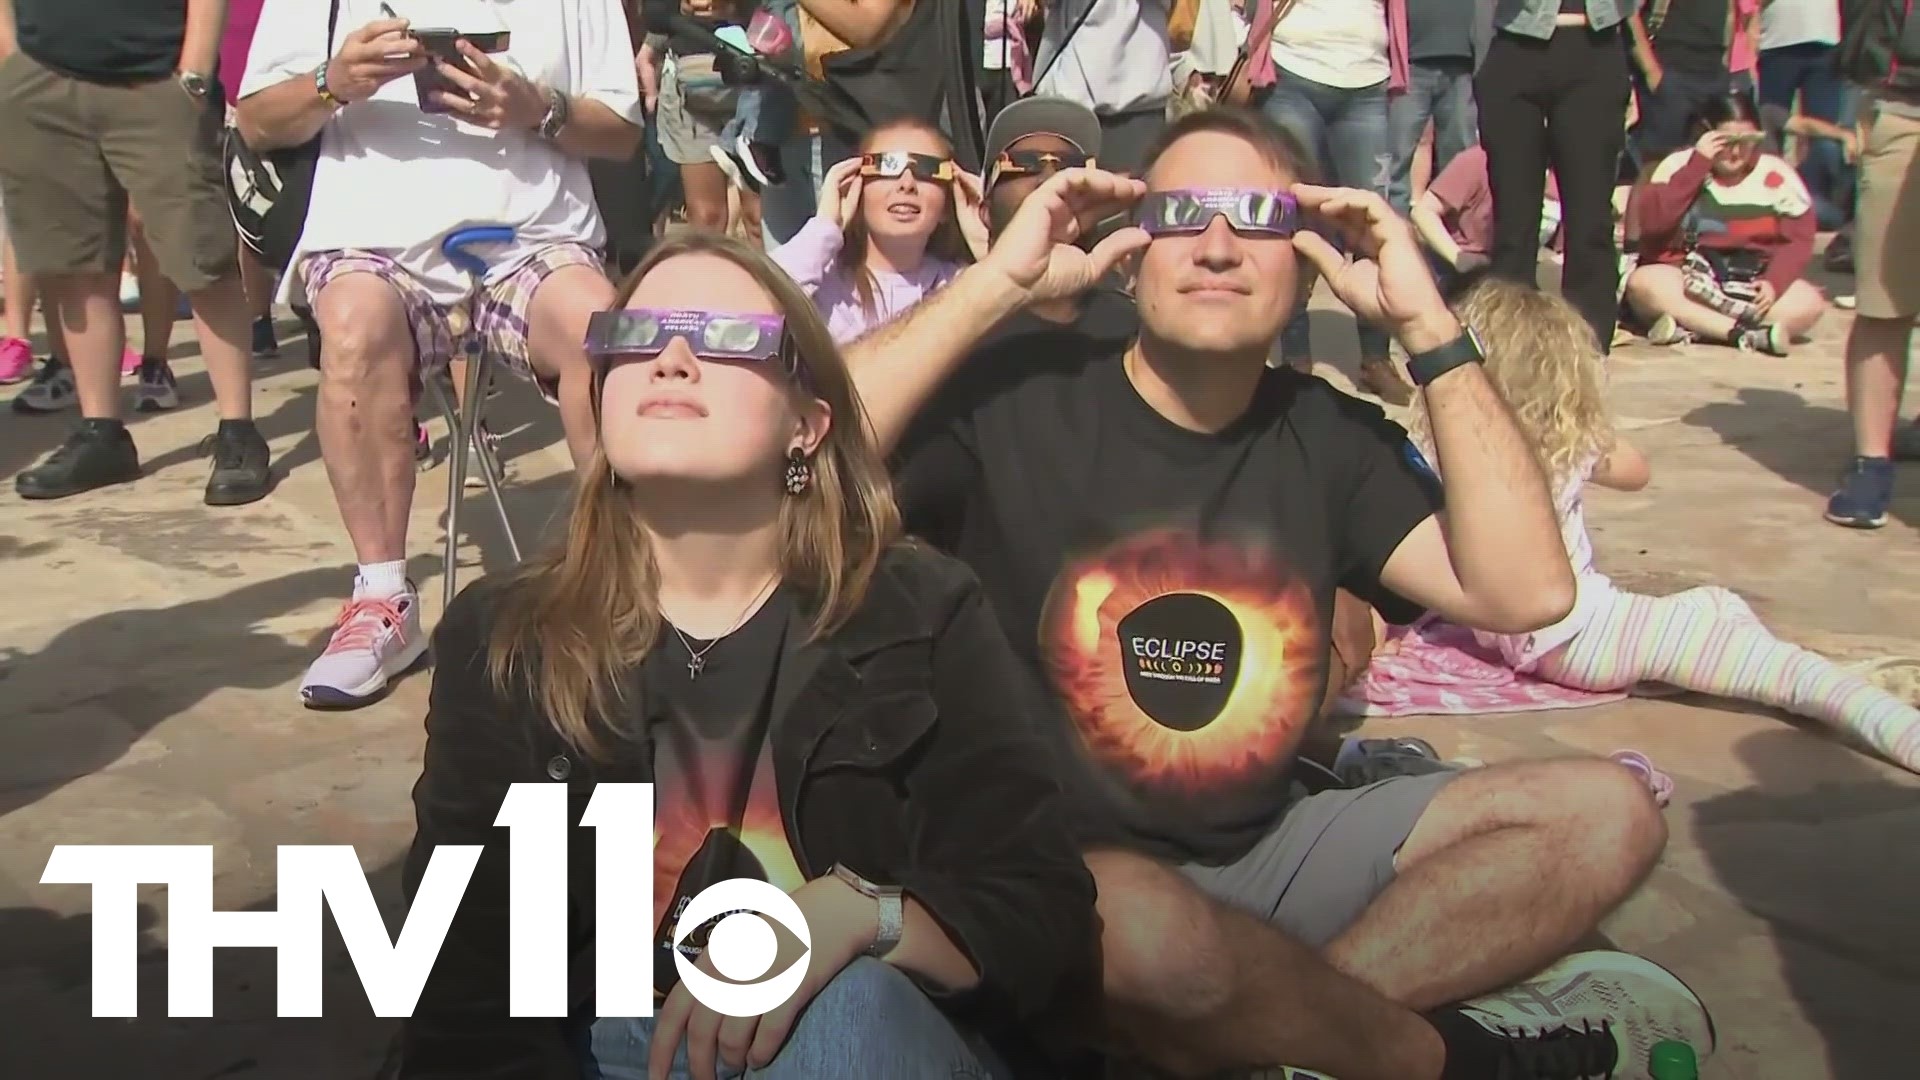 Eye doctors continue to warn about the dangers of looking directly at the sun as the Total Solar Eclipse approaches on April 8.